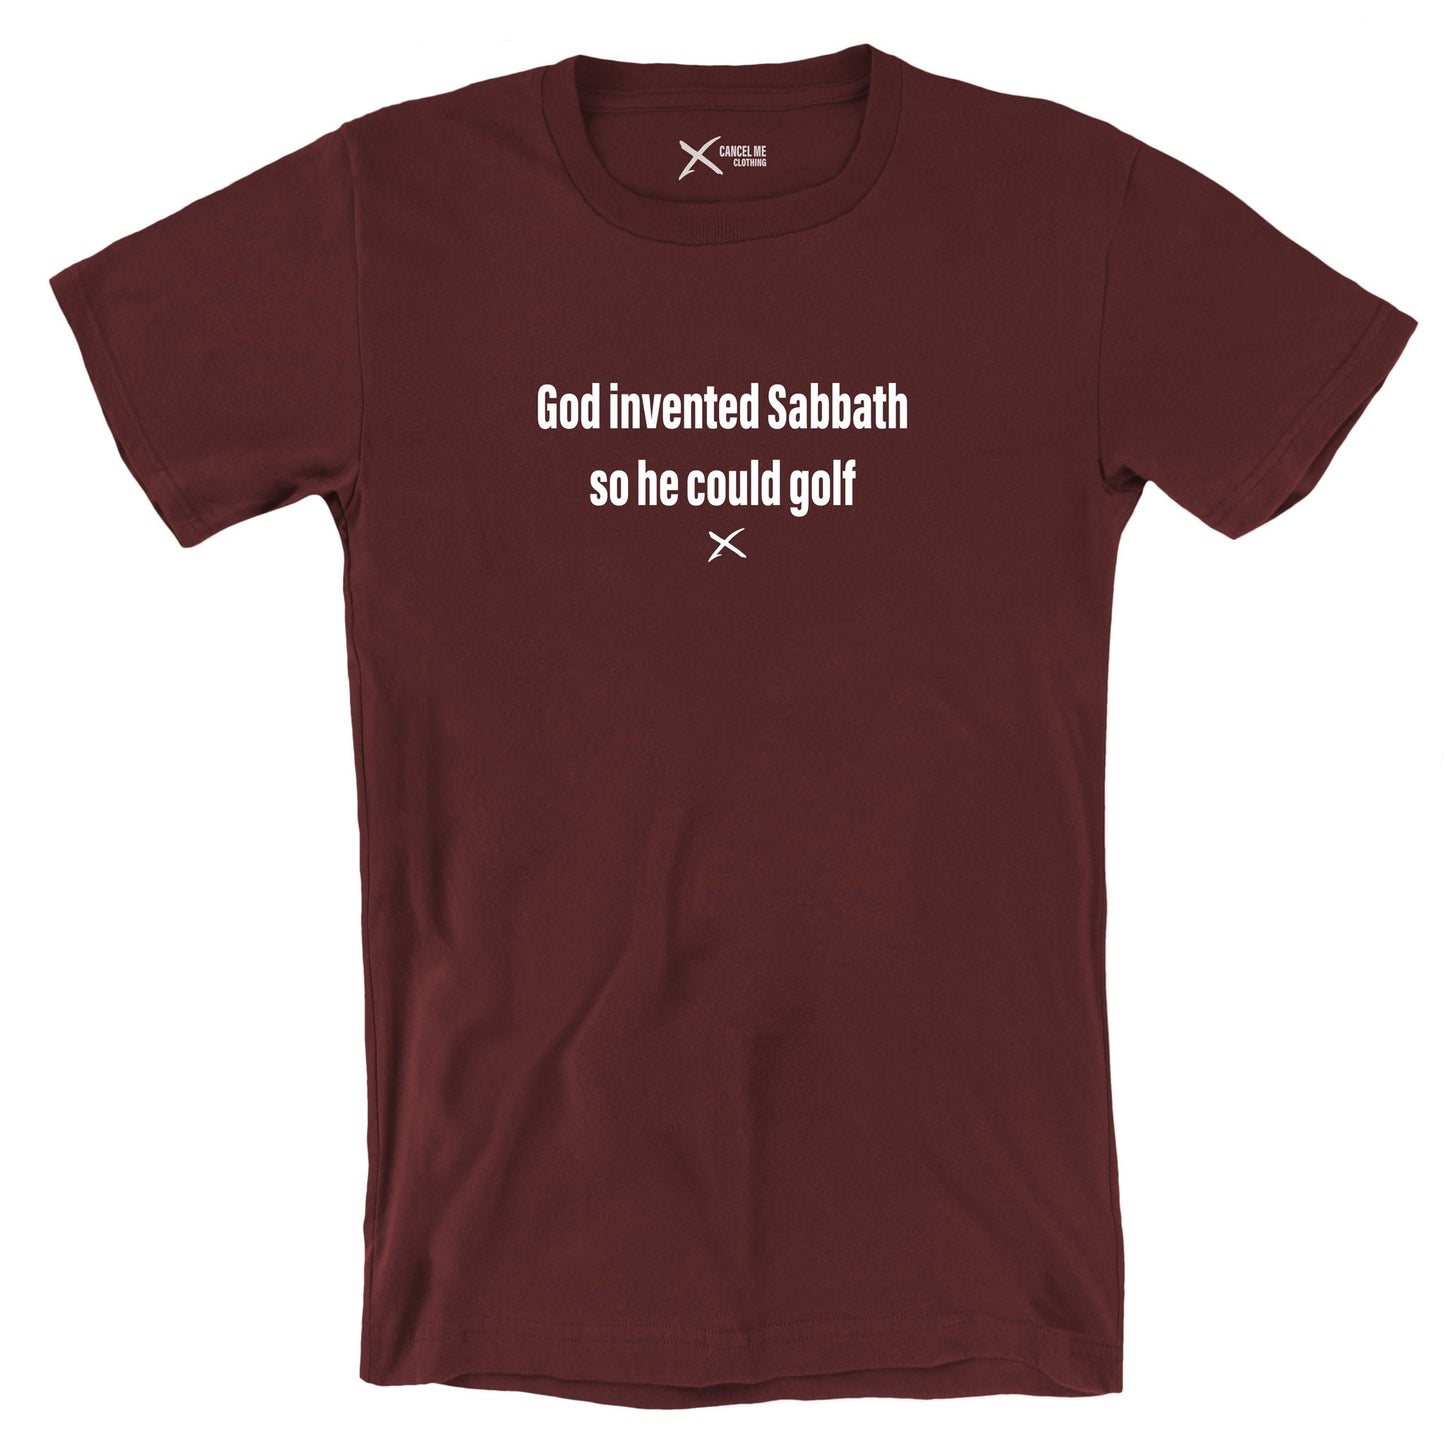 God invented Sabbath so he could golf - Shirt